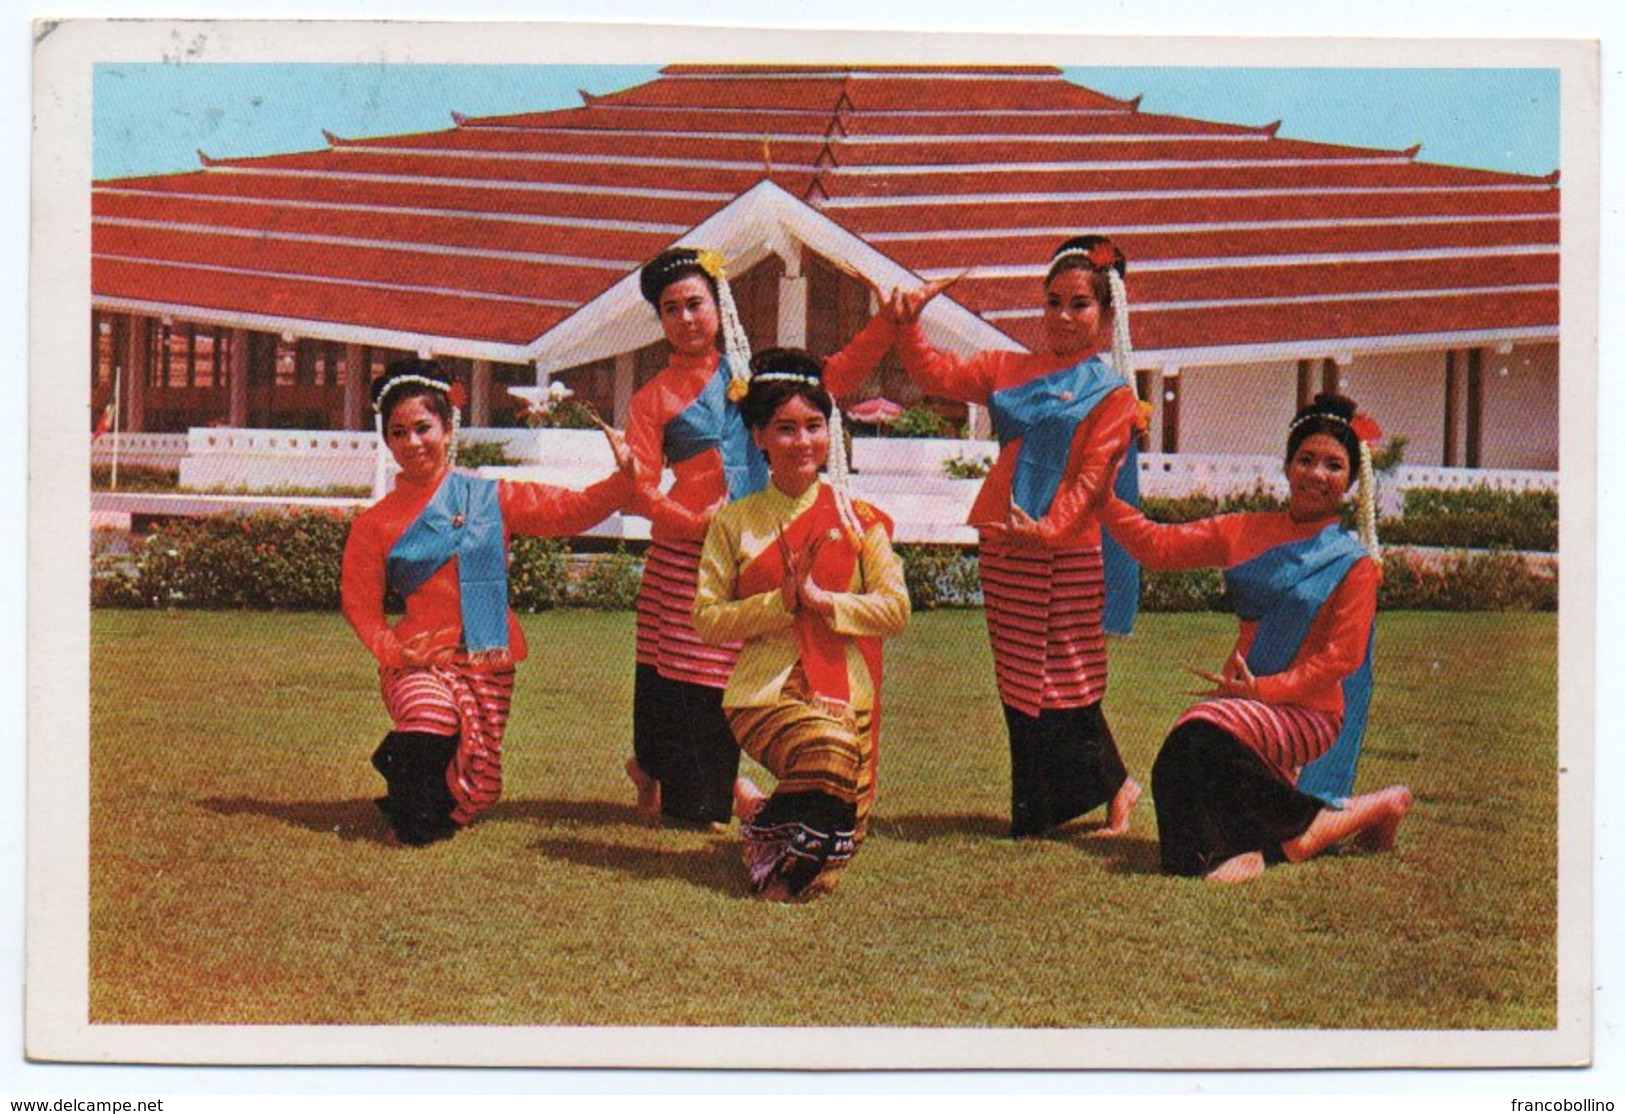 DANCE APPLYING THE FINGER NAILS- NORTH THAILAND / CIRCULATED FROM SUDAN 1978/THEMATIC STAMPS-ARAB POSTAL UNION - Thaïland